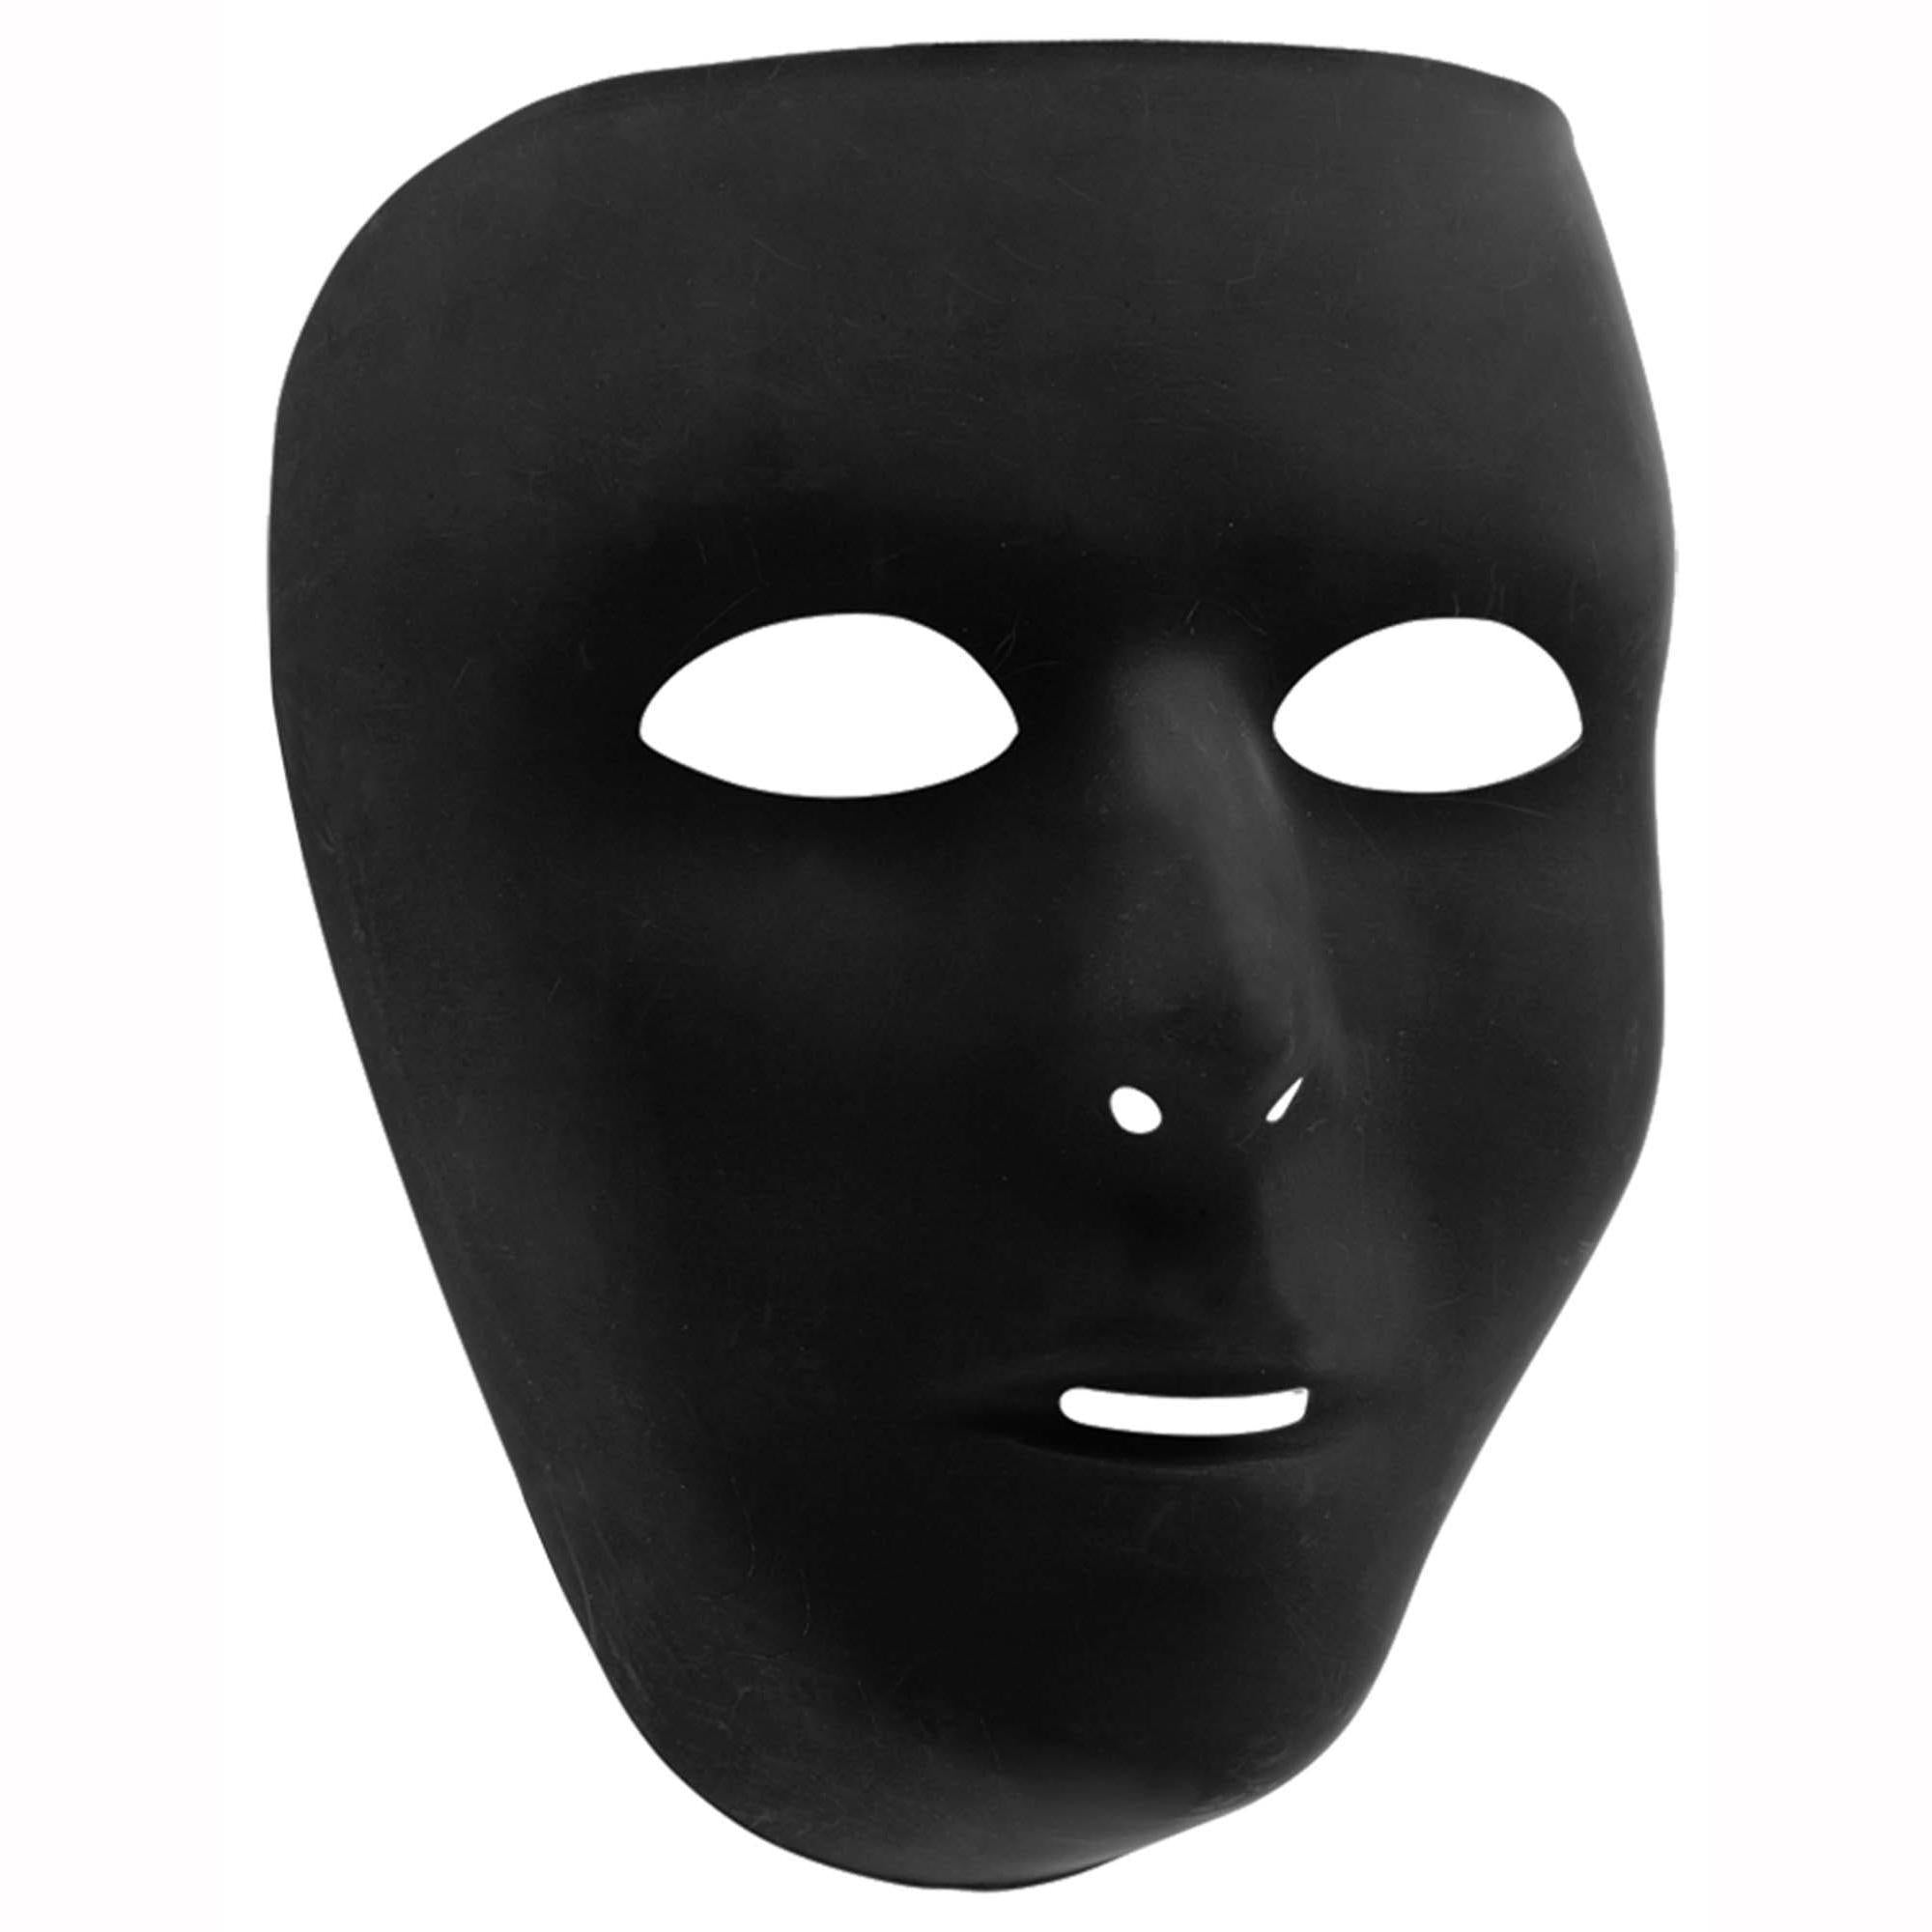 Basic Black Mask Costumes & Apparel - Party Centre